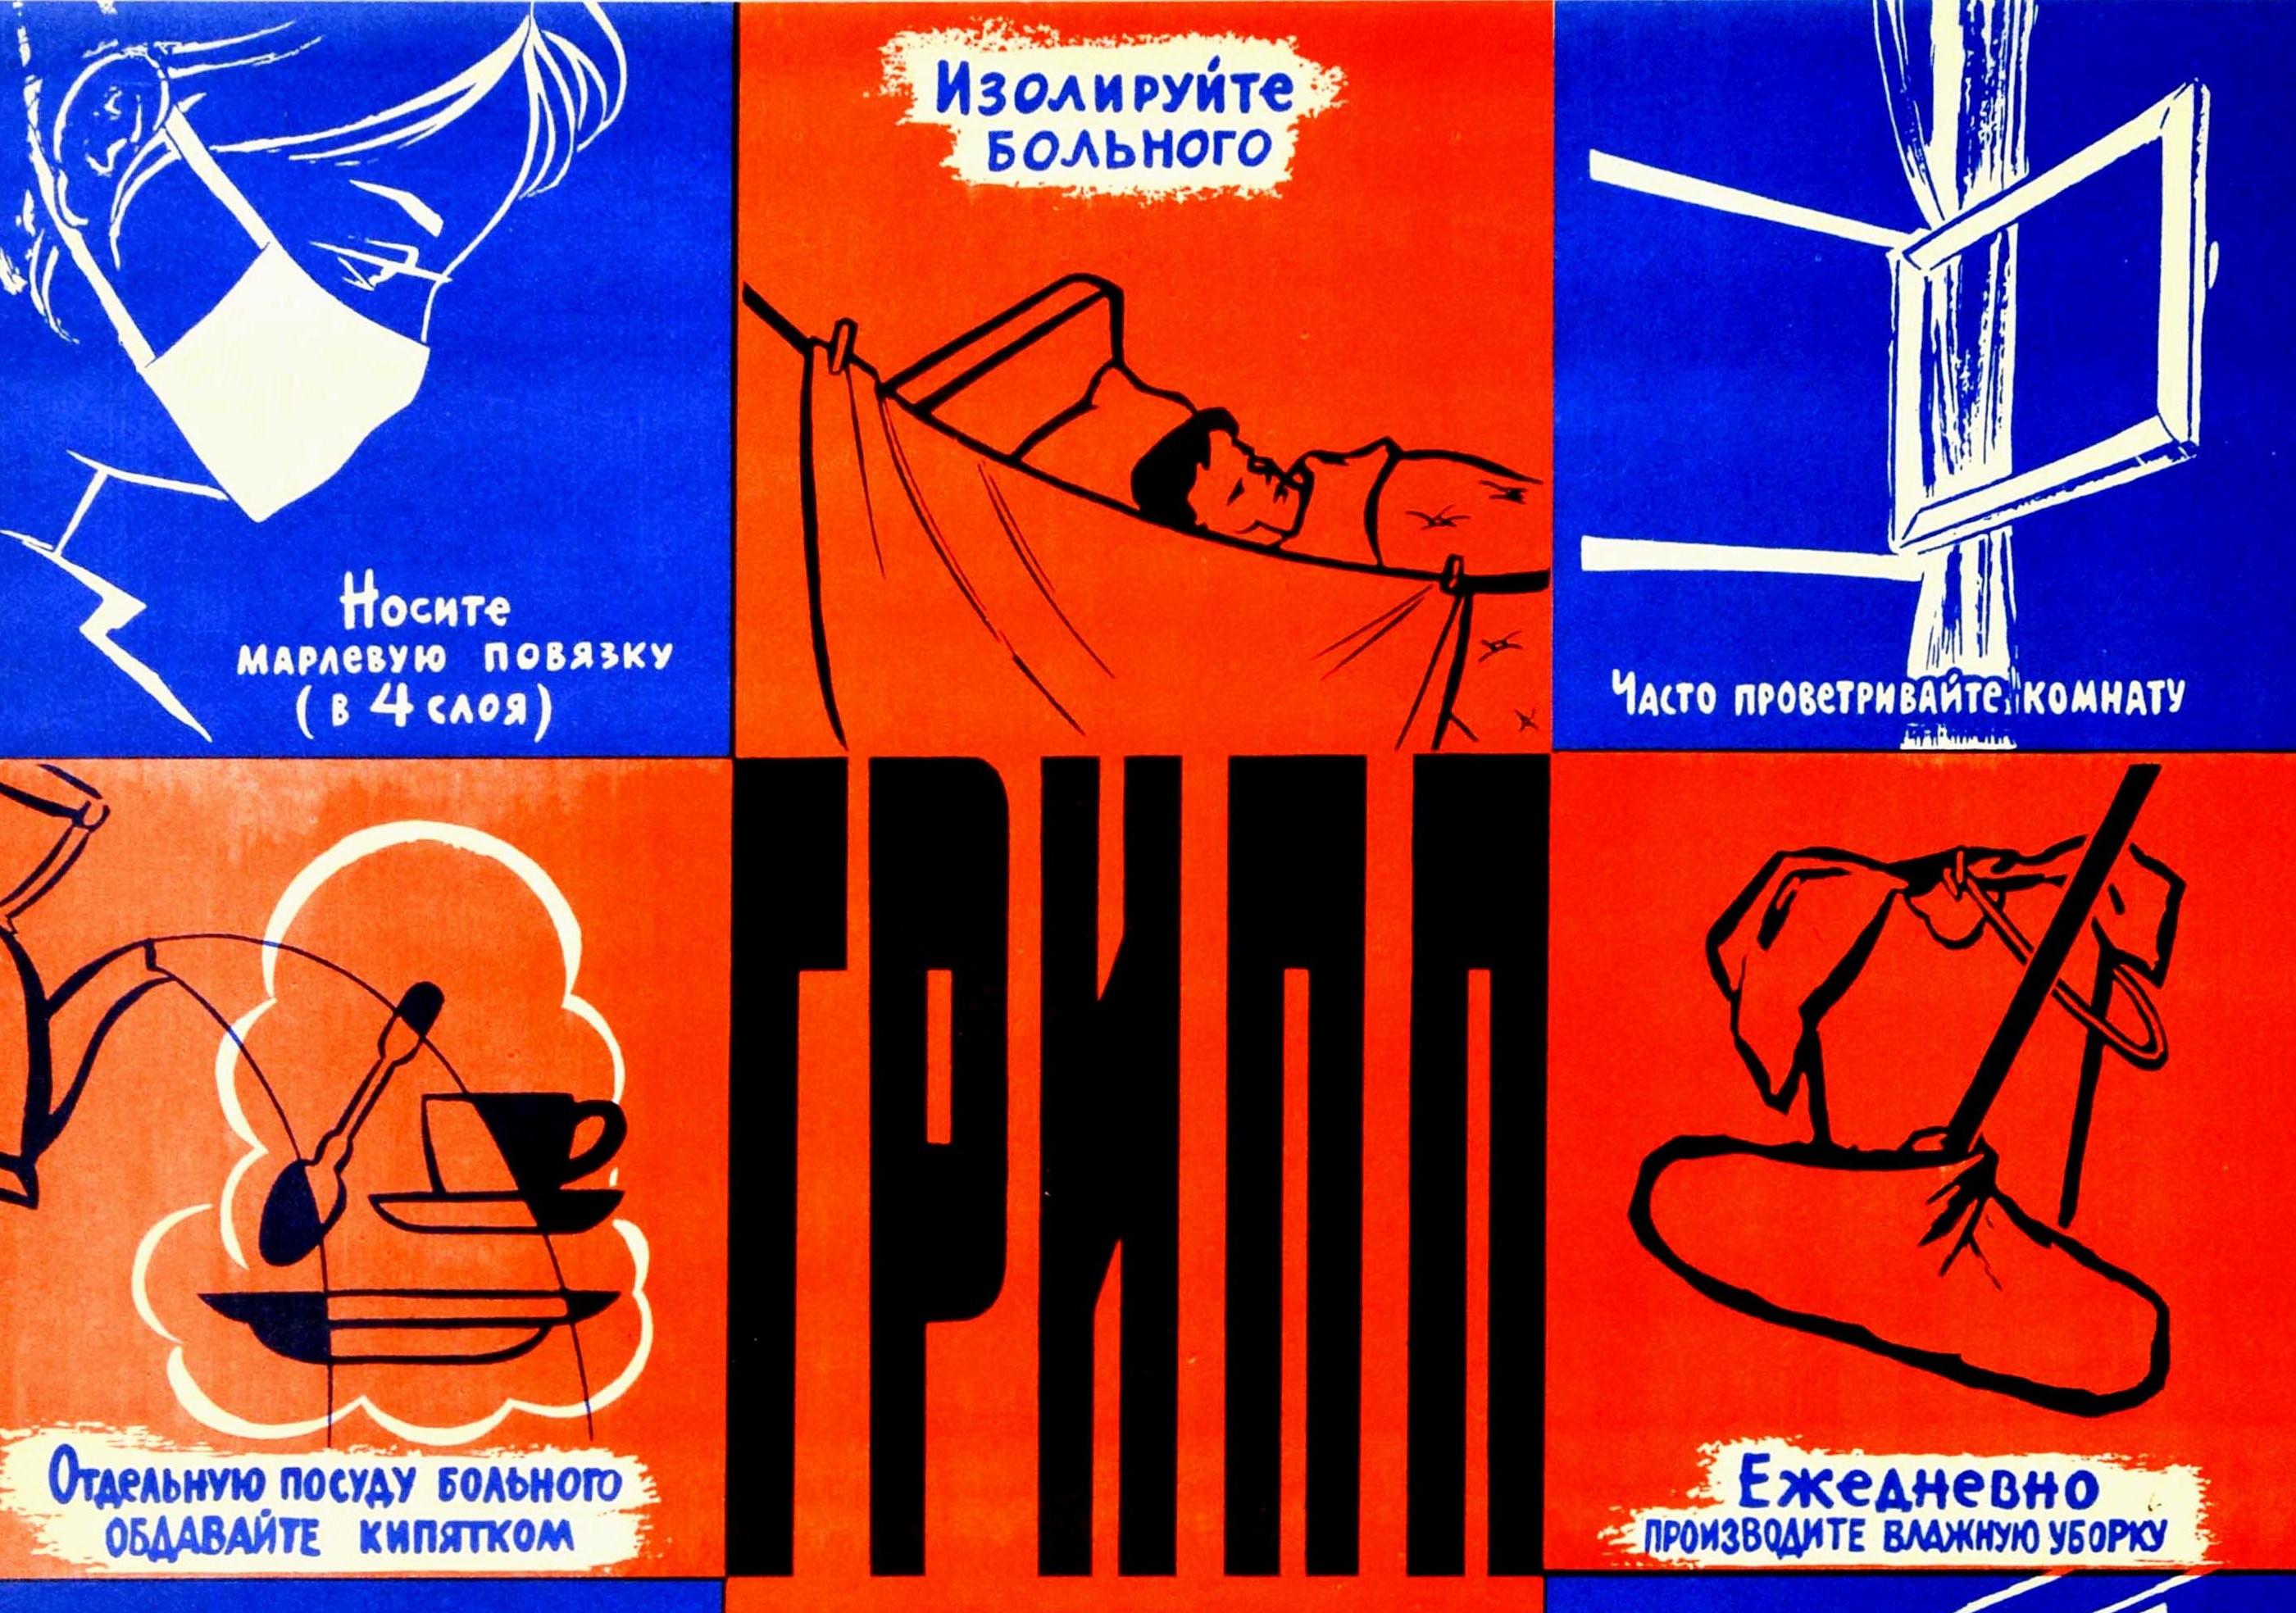 Original vintage Soviet public health poster - Flu can be prevented! - featuring illustrations against blue and red squares showing ways to prevent the spread of the flu virus including wearing a mask and keeping a flow of fresh air by opening